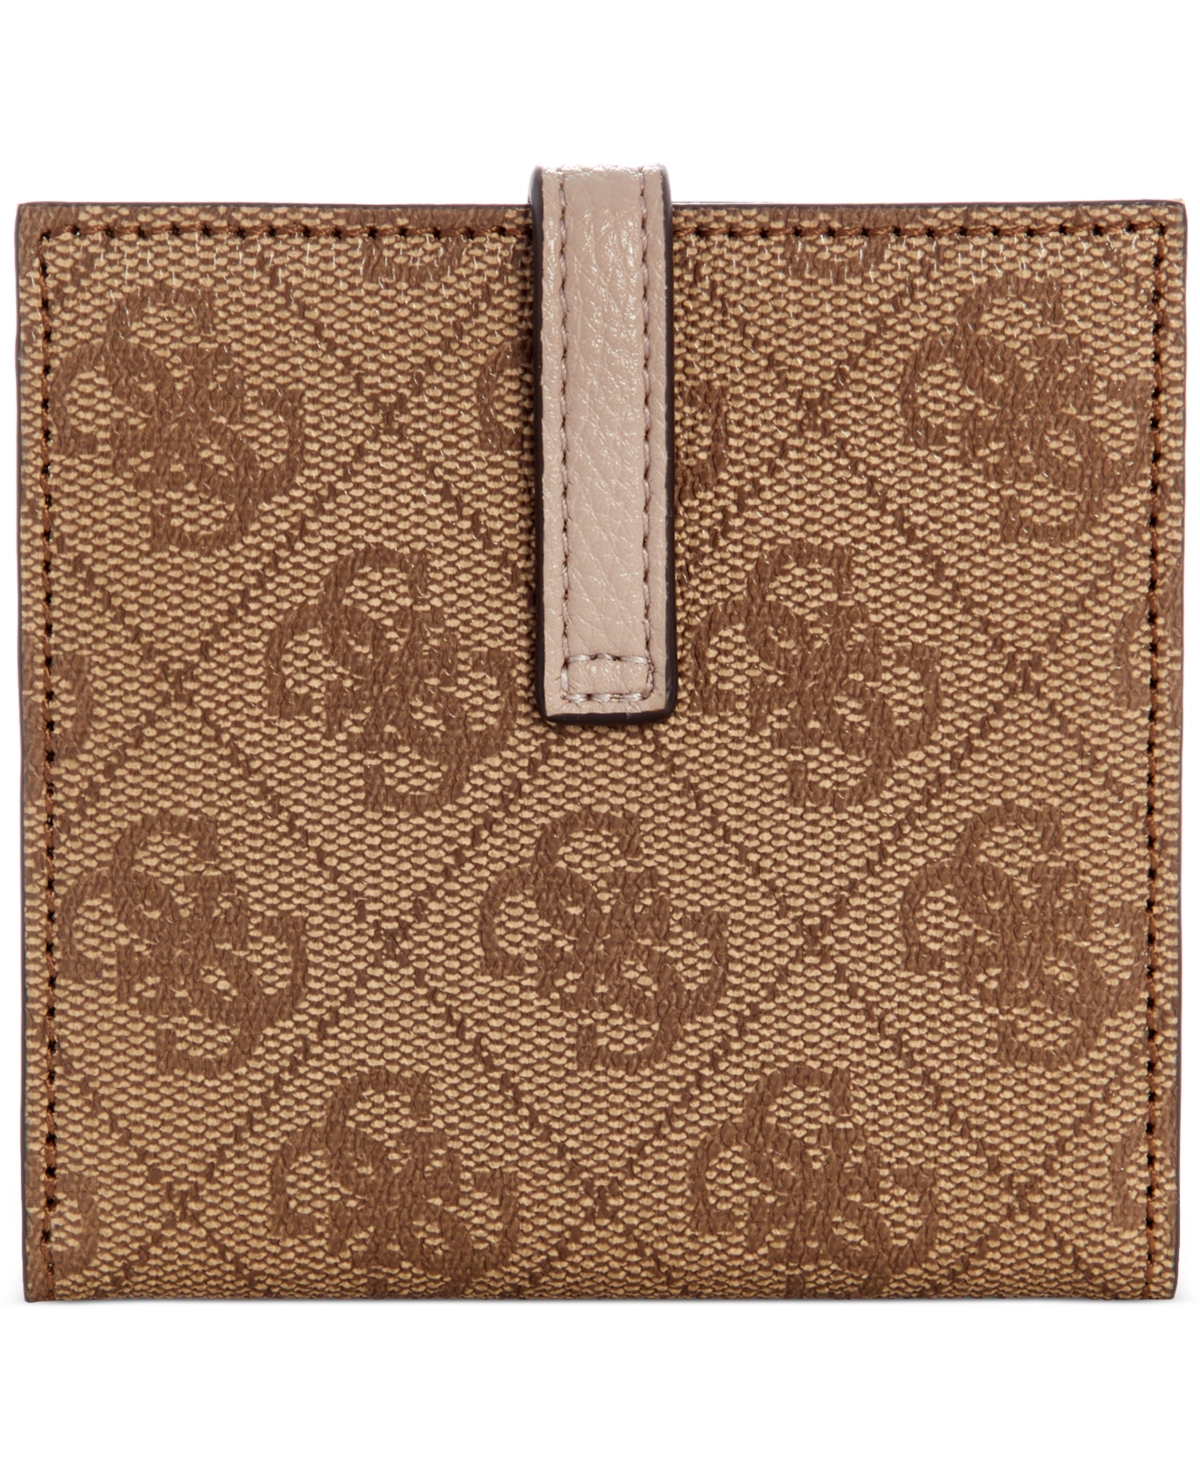 Guess Laurel Slg Tab Card Case In Brown